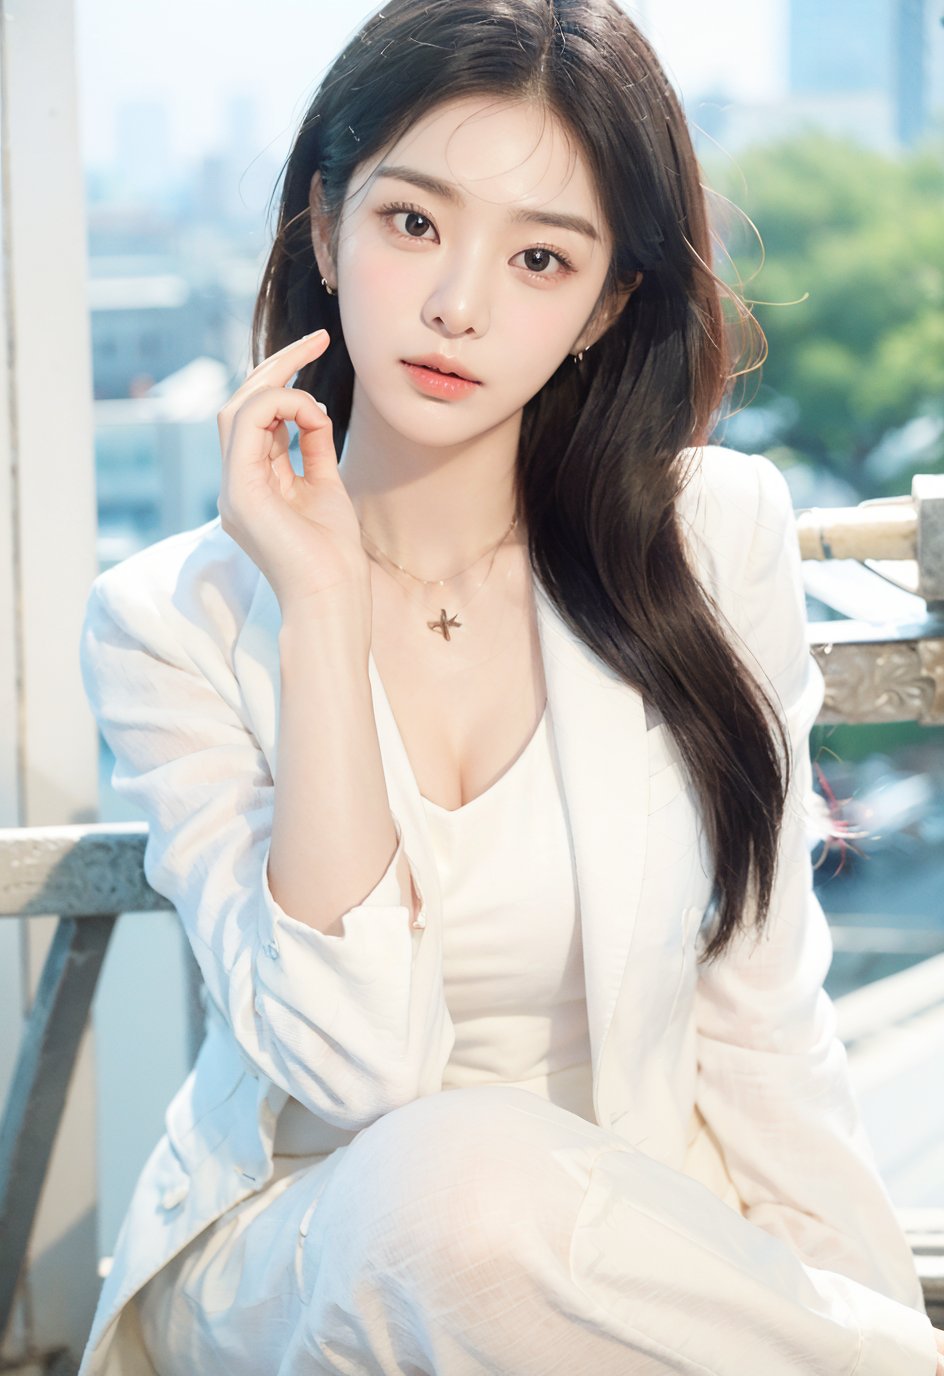 ((RAW photo:1.2)), 1girl, real art, (masterpiece), (best quality), highres, korea girl, 8k,(realistic, photo-realistic:1.4), (korean idol:1.2), ((beauty 19 year old)), naturalness, background, ultra detailed, physically-based rendering, beauty, detailed beautiful eyes and detailed face, long hair, wavy, tousled hair, waving hair, (Clean makeup), (Clean facial skin: 1.2), medium breast, ((She stands proudly on a rooftop in skinny jeans and an open tailored blazer, no clothes under blazer, her messy hair blowing slightly in the wind, a bustling cityscape that embodies urban sophistication, hands inside blazer pockets)),

, 1 girl, smile, detailed face, a woman with long black , (beautiful_detailed_light), outdoor scene, (aura, light), led lighting, magnificent light, body portrait, RAW, (intricate details:1.3), (best quality:1.3), (masterpiece:1.3), (hyper realistic:1.3), best quality, 1 girl, ultra-detailed, ultra high resolution, very detailed mphysically based rendering, dynamic angle, dynamic pose, wind, 8K UHD, Vivid picture, High definition, intricate details, detailed, finely detailed, high detail, extremely detailed cg, High quality shadow, a realistic representation of the face, beautiful detailed, (high detailed skin, skin details), slim waist, beautiful and realistic and detailed hands and fingers:1, best ratio four finger and one thumb, (detailed face, detailed eyes, beautiful face), ((korean beauty, kpop idol, ulzzang, korean celebrity, korean cute, korean actress, korean, a beautiful 18 years old beautiful korean girl)), (high detailed skin, skin details), Detailed beautiful delicate face, Detailed beautiful delicate eyes, a face of perfect proportion, (beautiful and realistic and detailed hands and fingers:1.3), (Big breasts:1.3), (full body shot:1.3), (long legs:1.3), (sparkling eyes:1.3), (sparkling lips:1.3), taken by Canon EOS, SIGMA Art Lens 35mm F1.4, ISO 200 Shutter Speed 2000, Vivid ((korean beauty, kpop idol, ulzzang, korean celebrity, korean cute, korean actress, korean, 인스타 여신:1.3, a beautiful 18 years old beautiful korean girl)), (blue eye), (black long hair),chanel_jewelry, chanel_bag, vancleef_necklace,hourglass bodyshape ,looking_at_viewer,,Big breast, Seolah,Seolah,perfect light